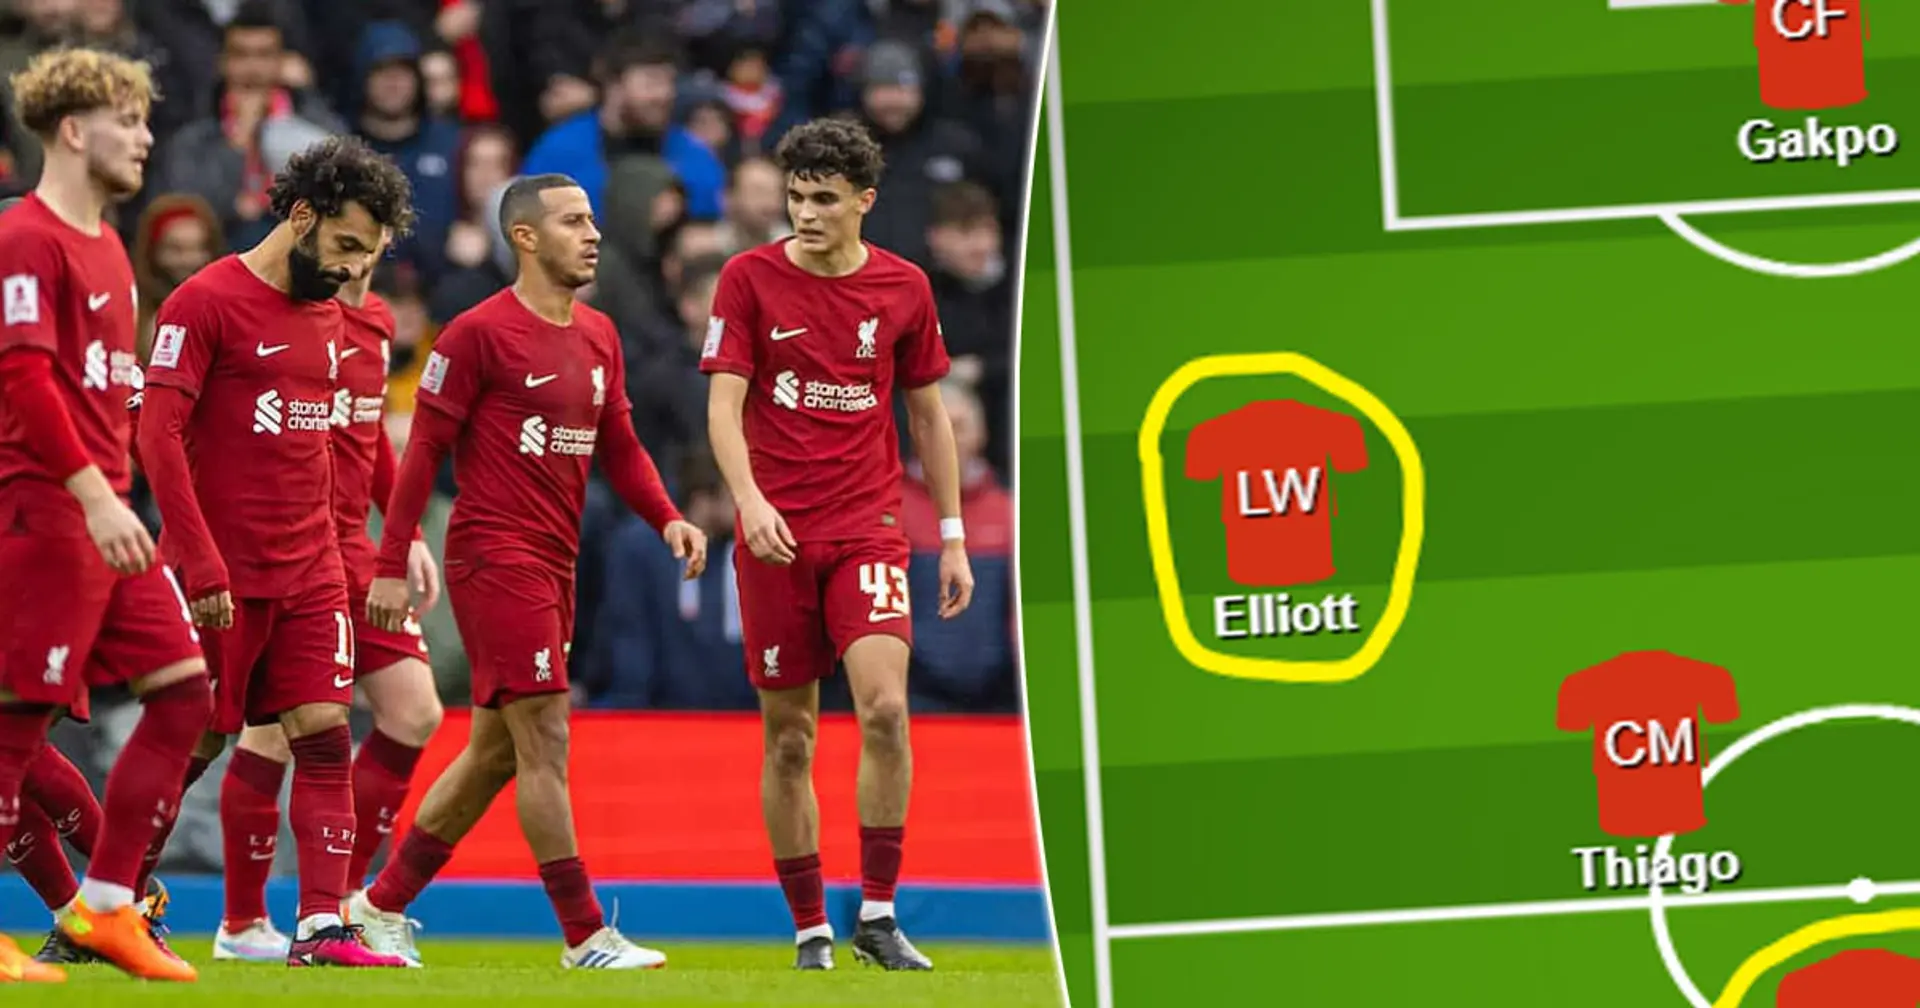 Liverpool's biggest strengths in Brighton defeat shown in lineup - 3 players feature